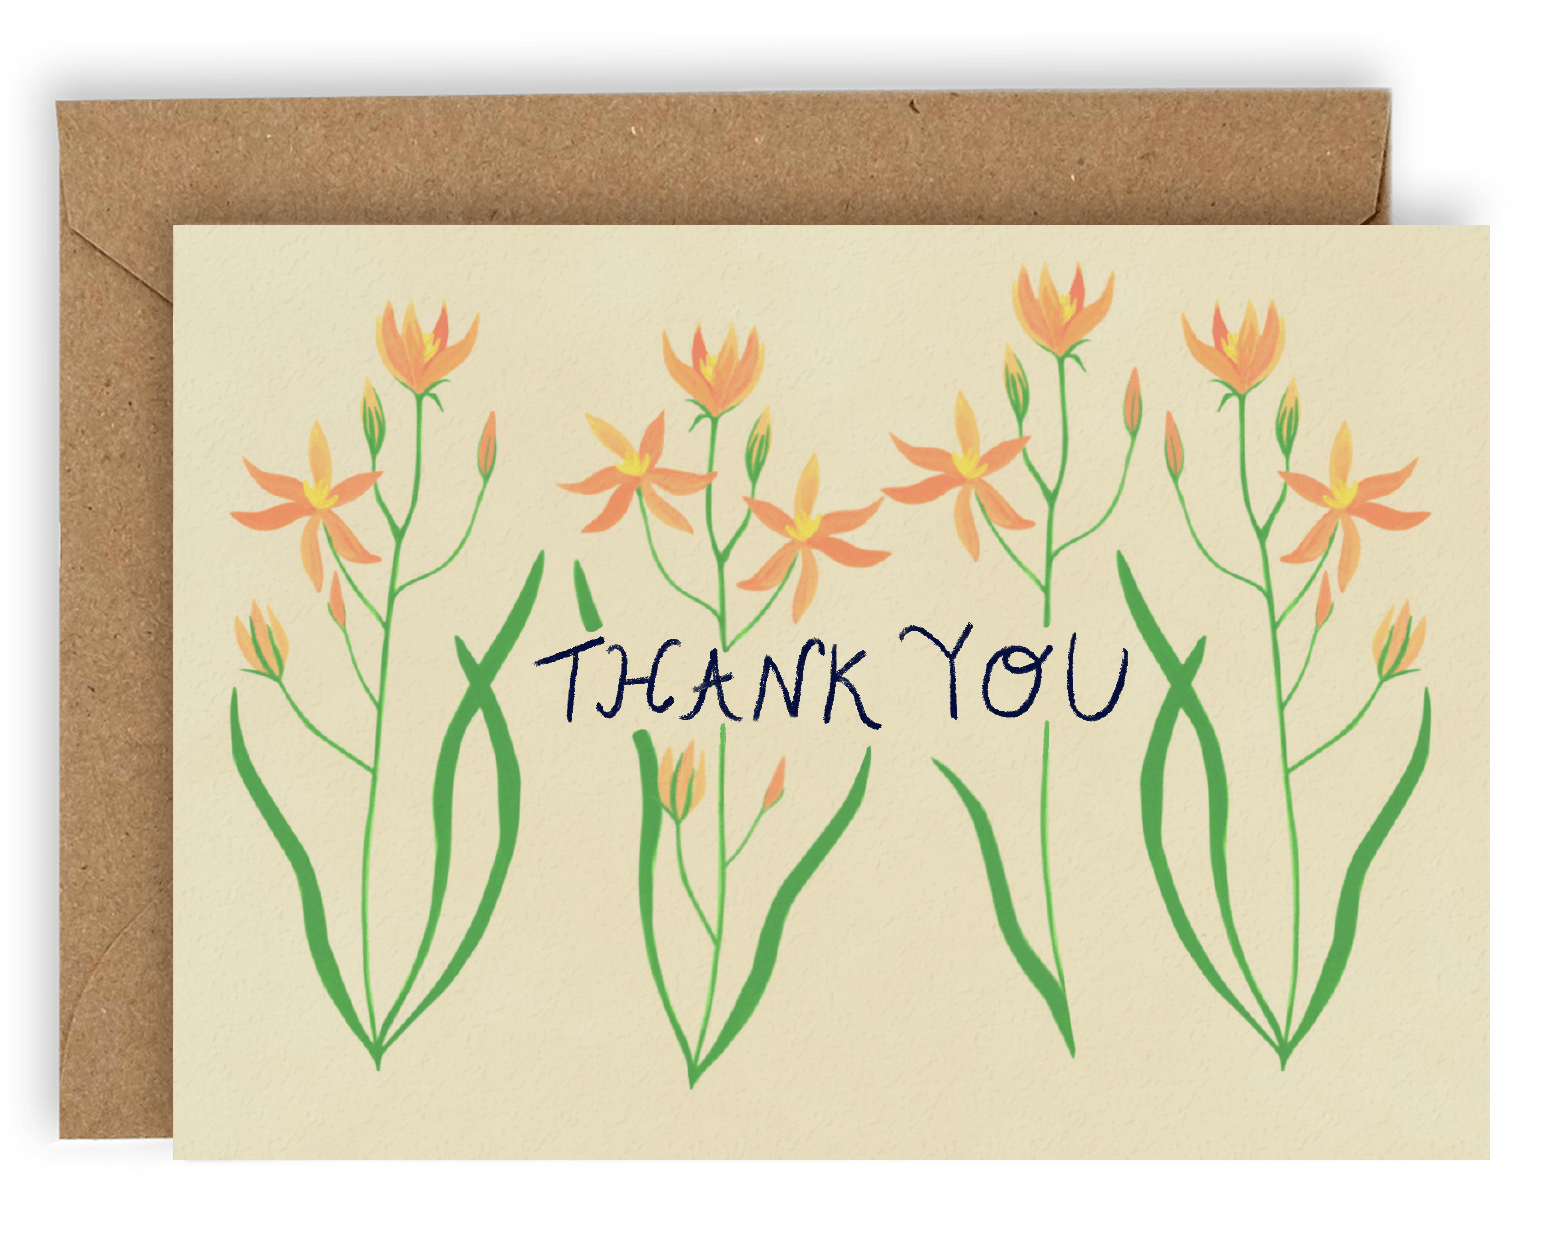 Four stems of orange forest flowers reaching upward cover the card nearly top to bottom horizontally, with the words &quot;Thank You&quot; going through the center of them in black ink. This design is printed on a cream colored background. Shown with Kraft envelope.